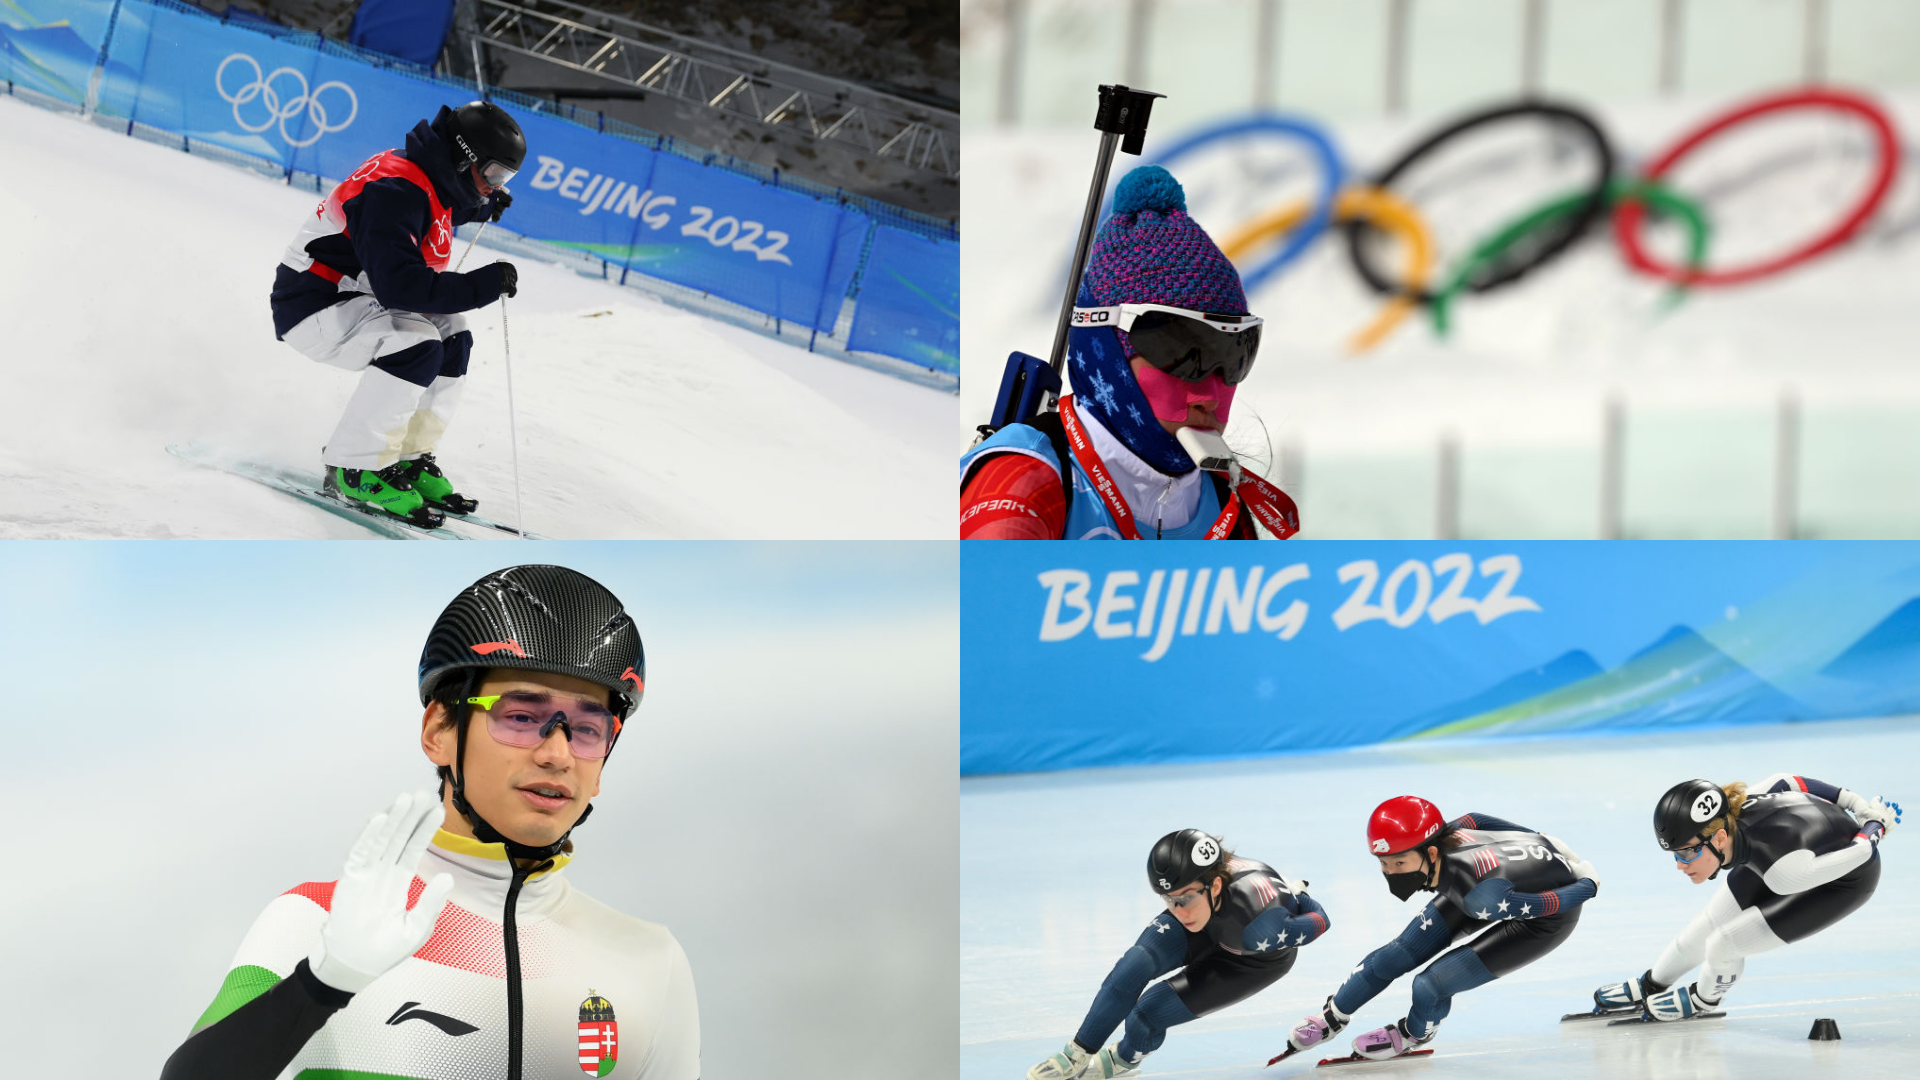 The A.V. Club’s guide to watching the 2022 Winter Olympics